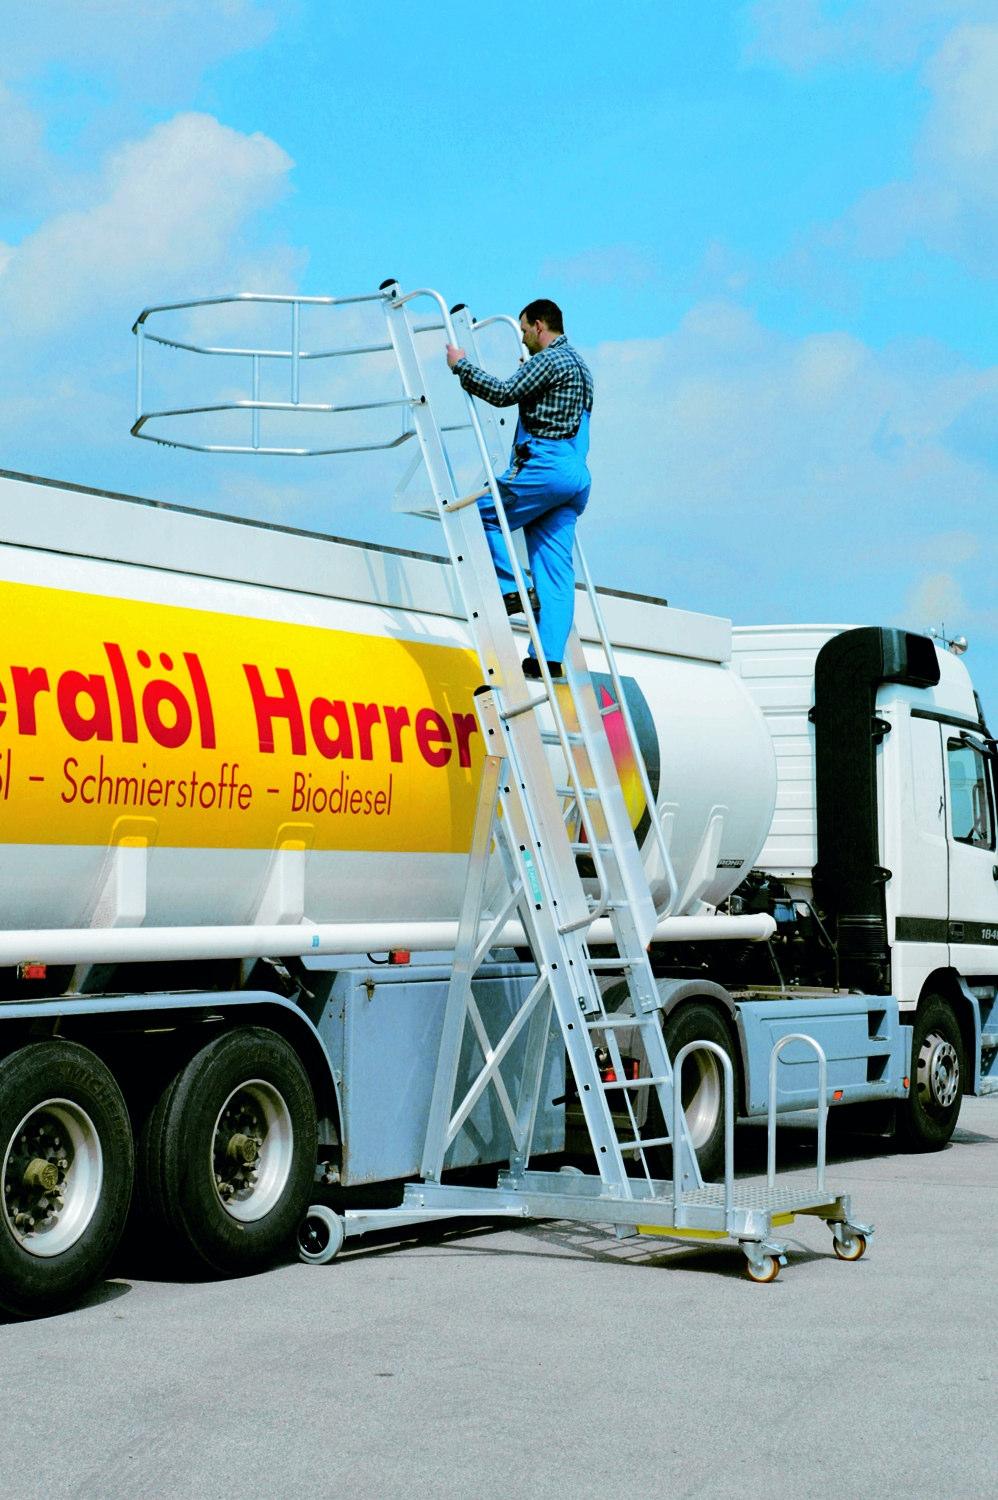 MOBILE TANKER LADDER The Tanker Ladder is a mobile counter-balanced two-part extending platform ladder with a